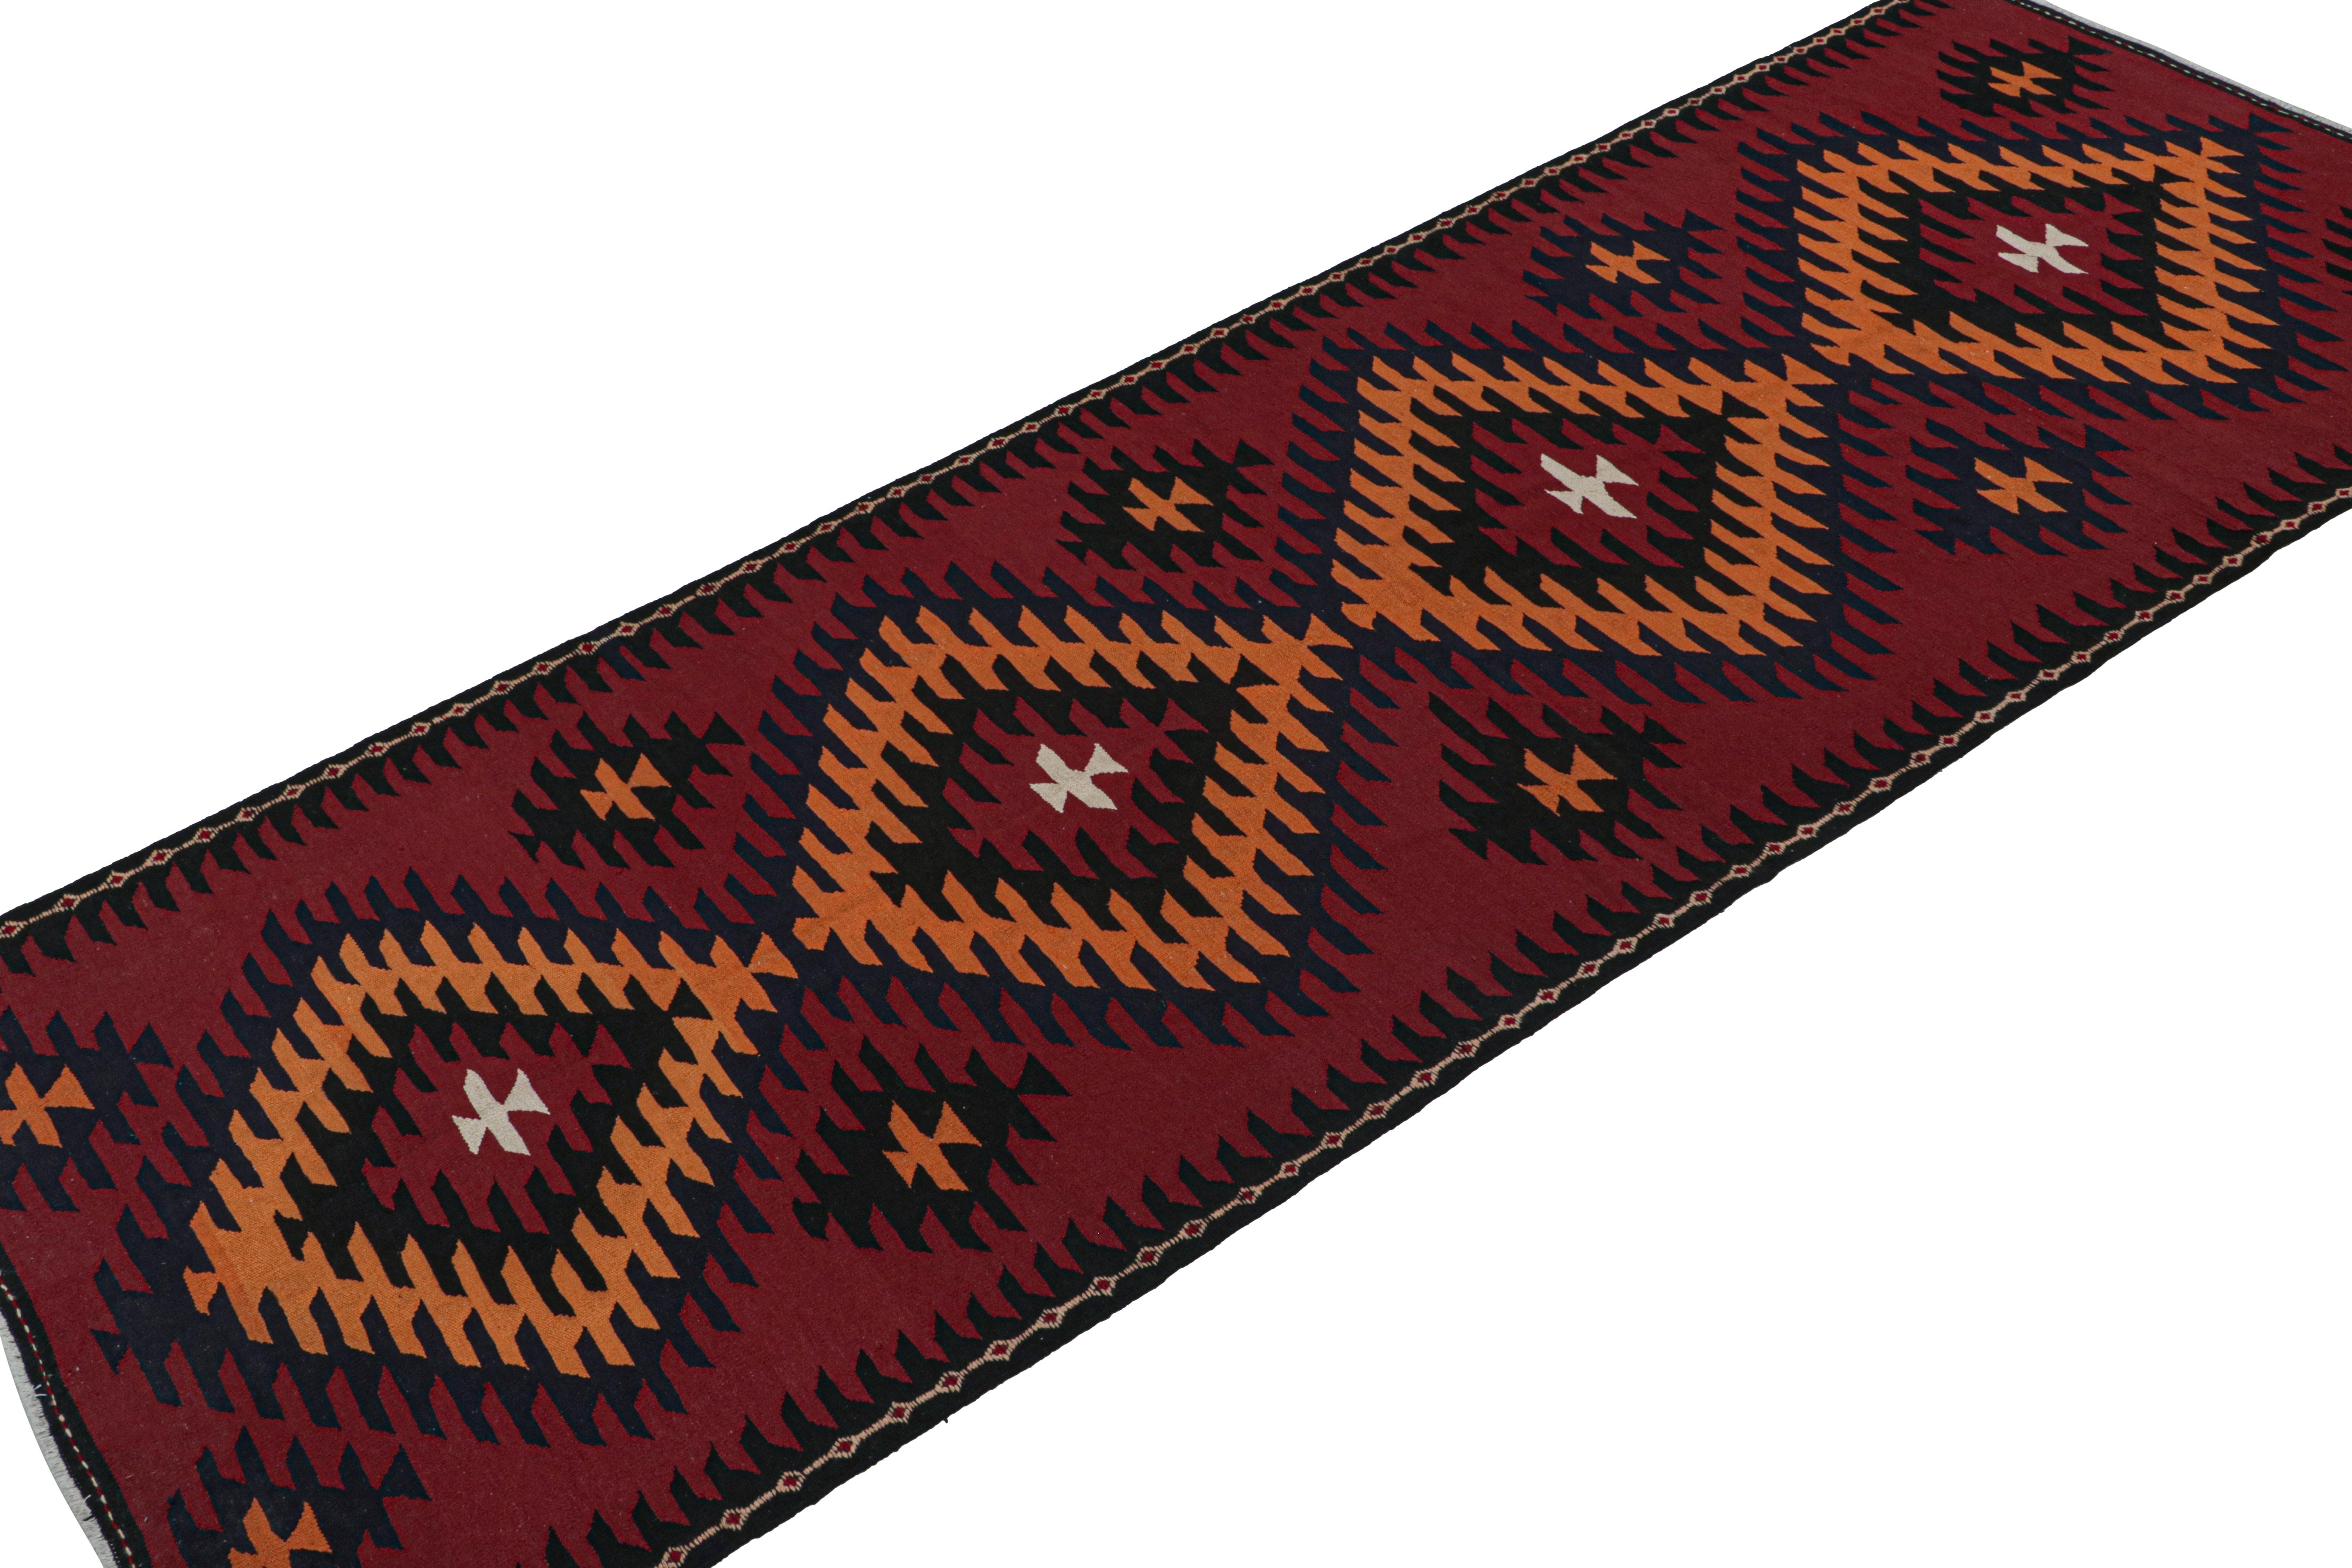 Tribal Vintage Northwest Persian Kilim in Red with Geometric Patterns For Sale